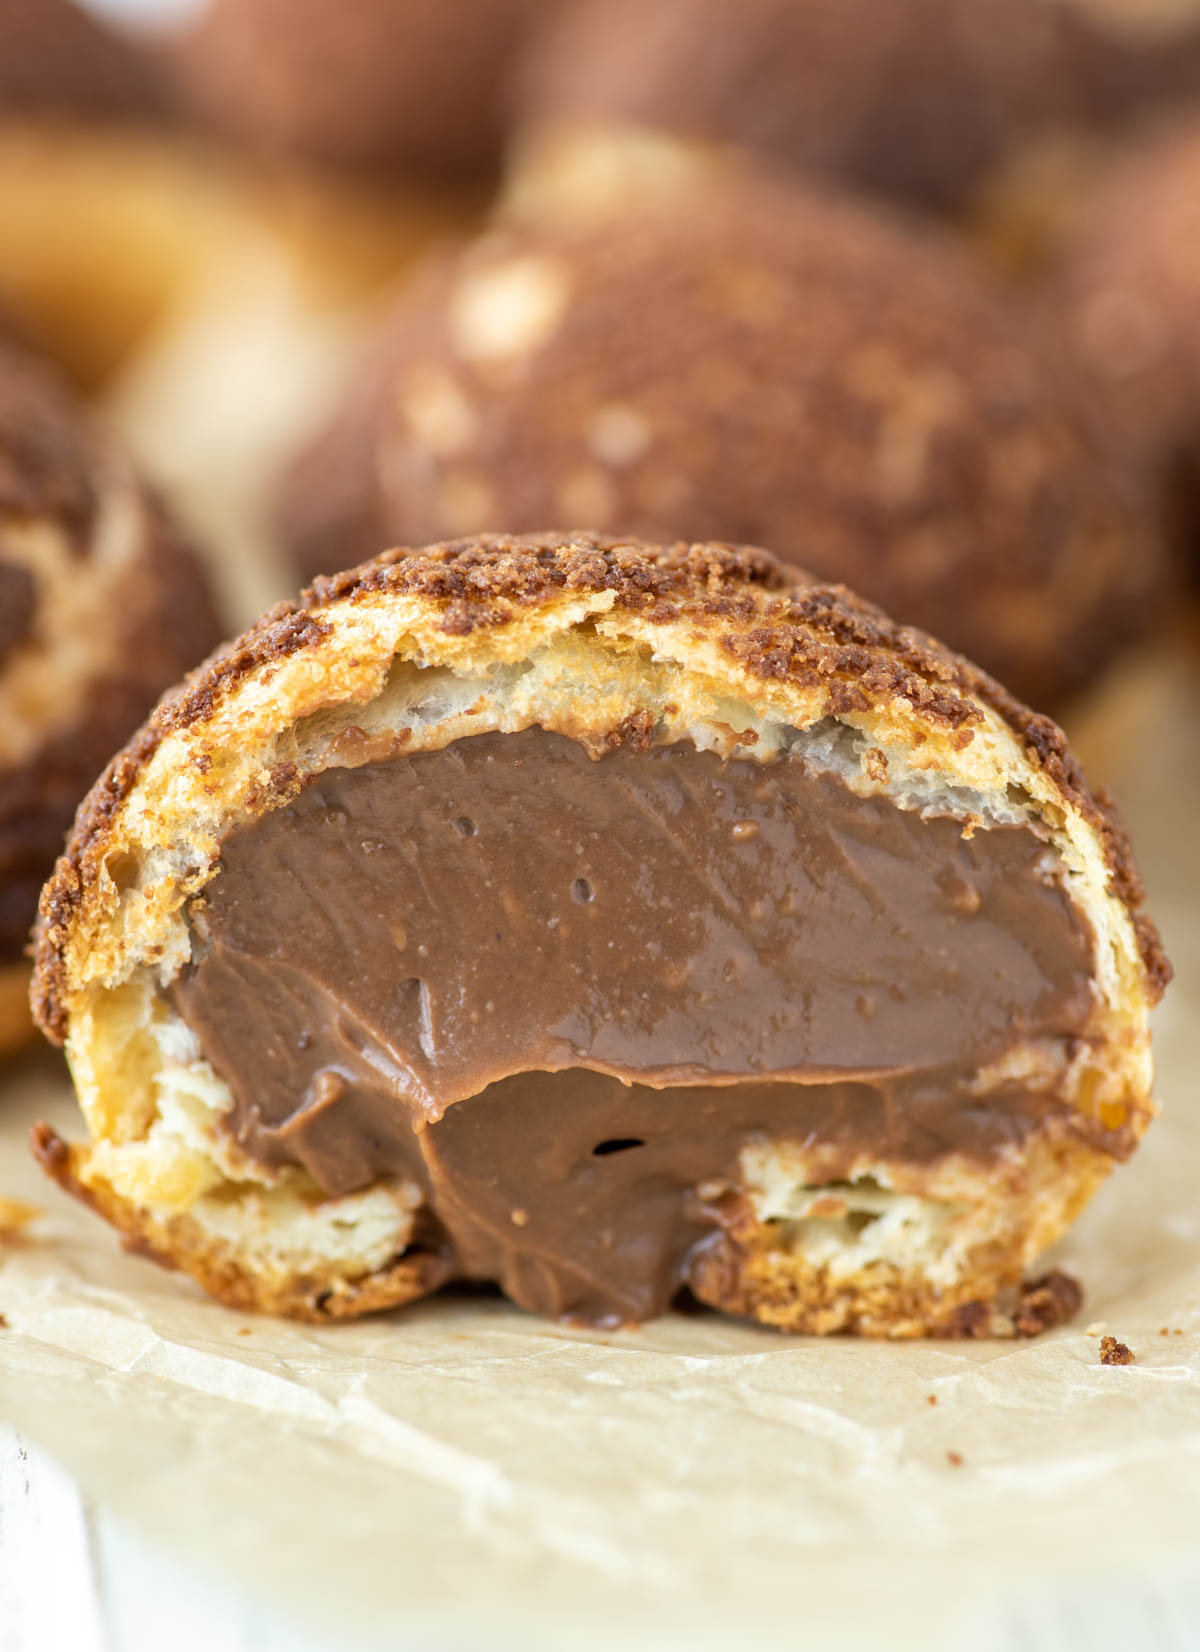 chocolate cream puff cut in half with chocolate pastry cream oozing out